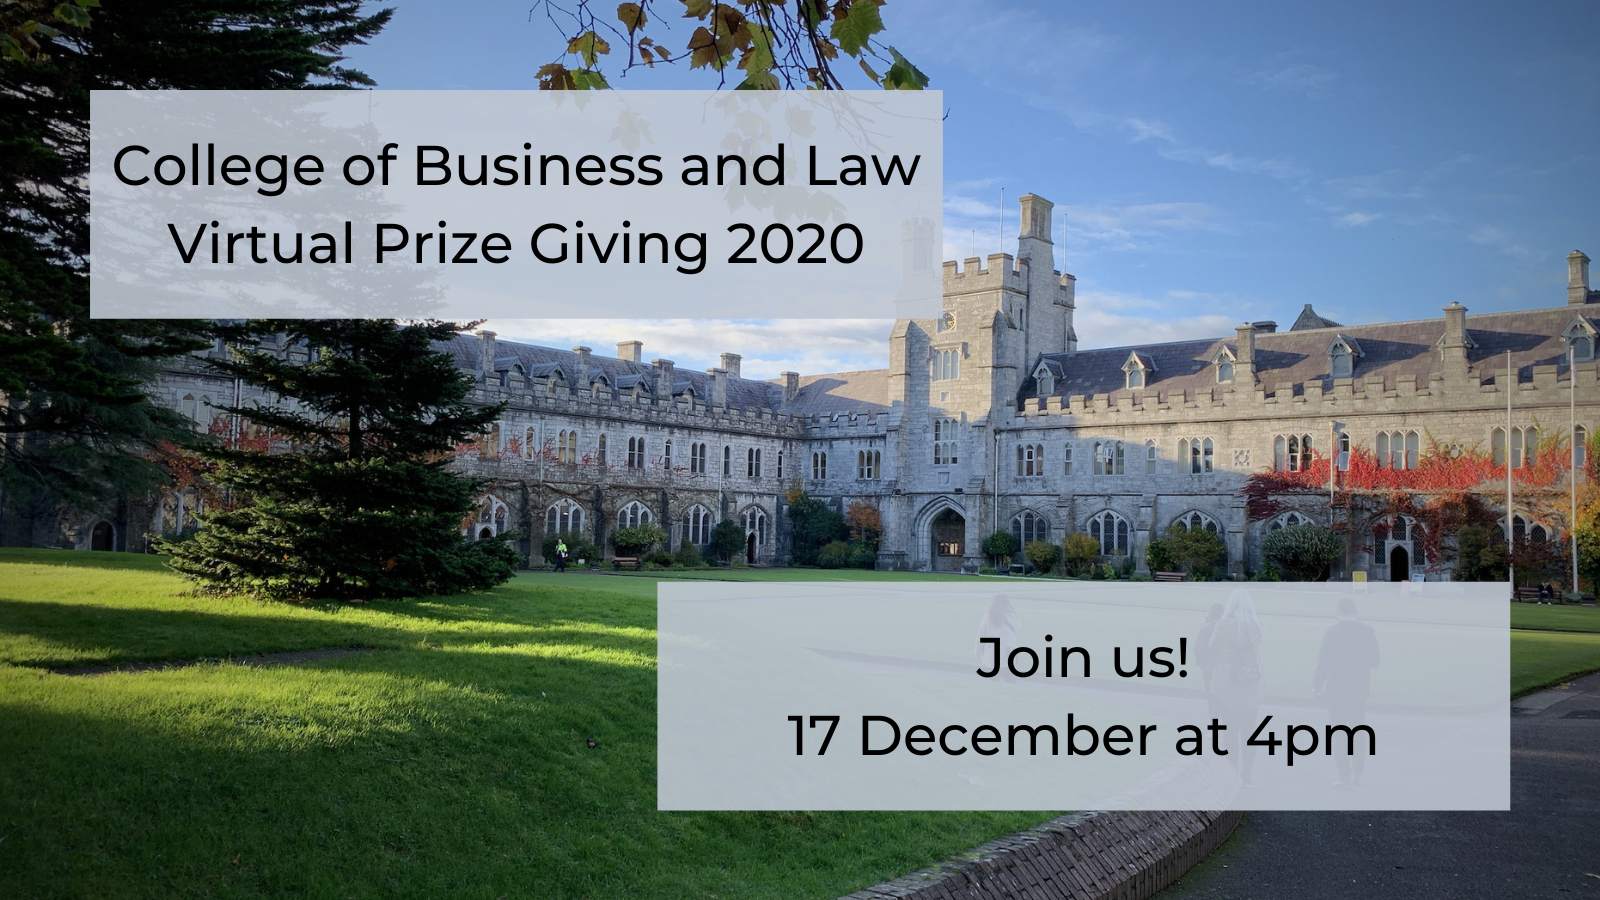 WATCH: School of Law Students Awarded at UCC College of Business and Law Virtual Prize Giving